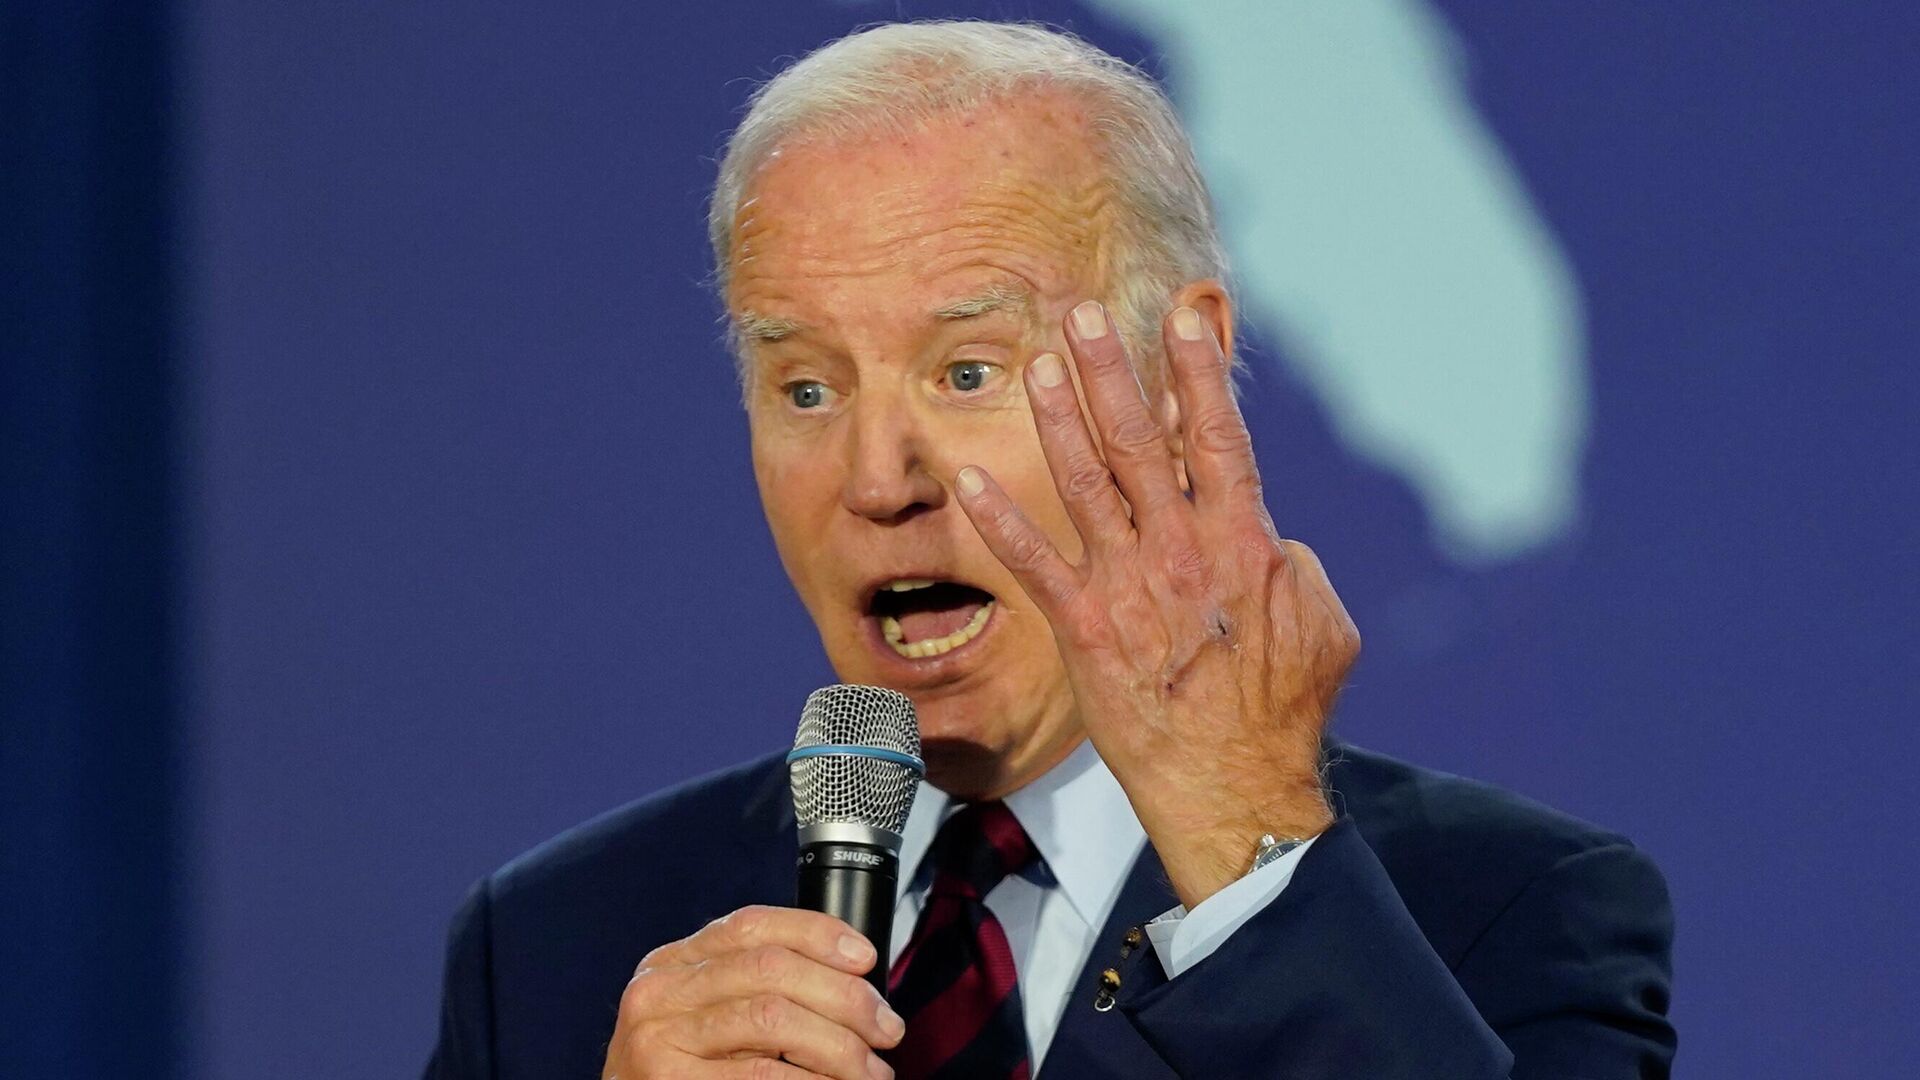 Biden’s two “guiding stars” regarding Ukraine and Russia have been revealed